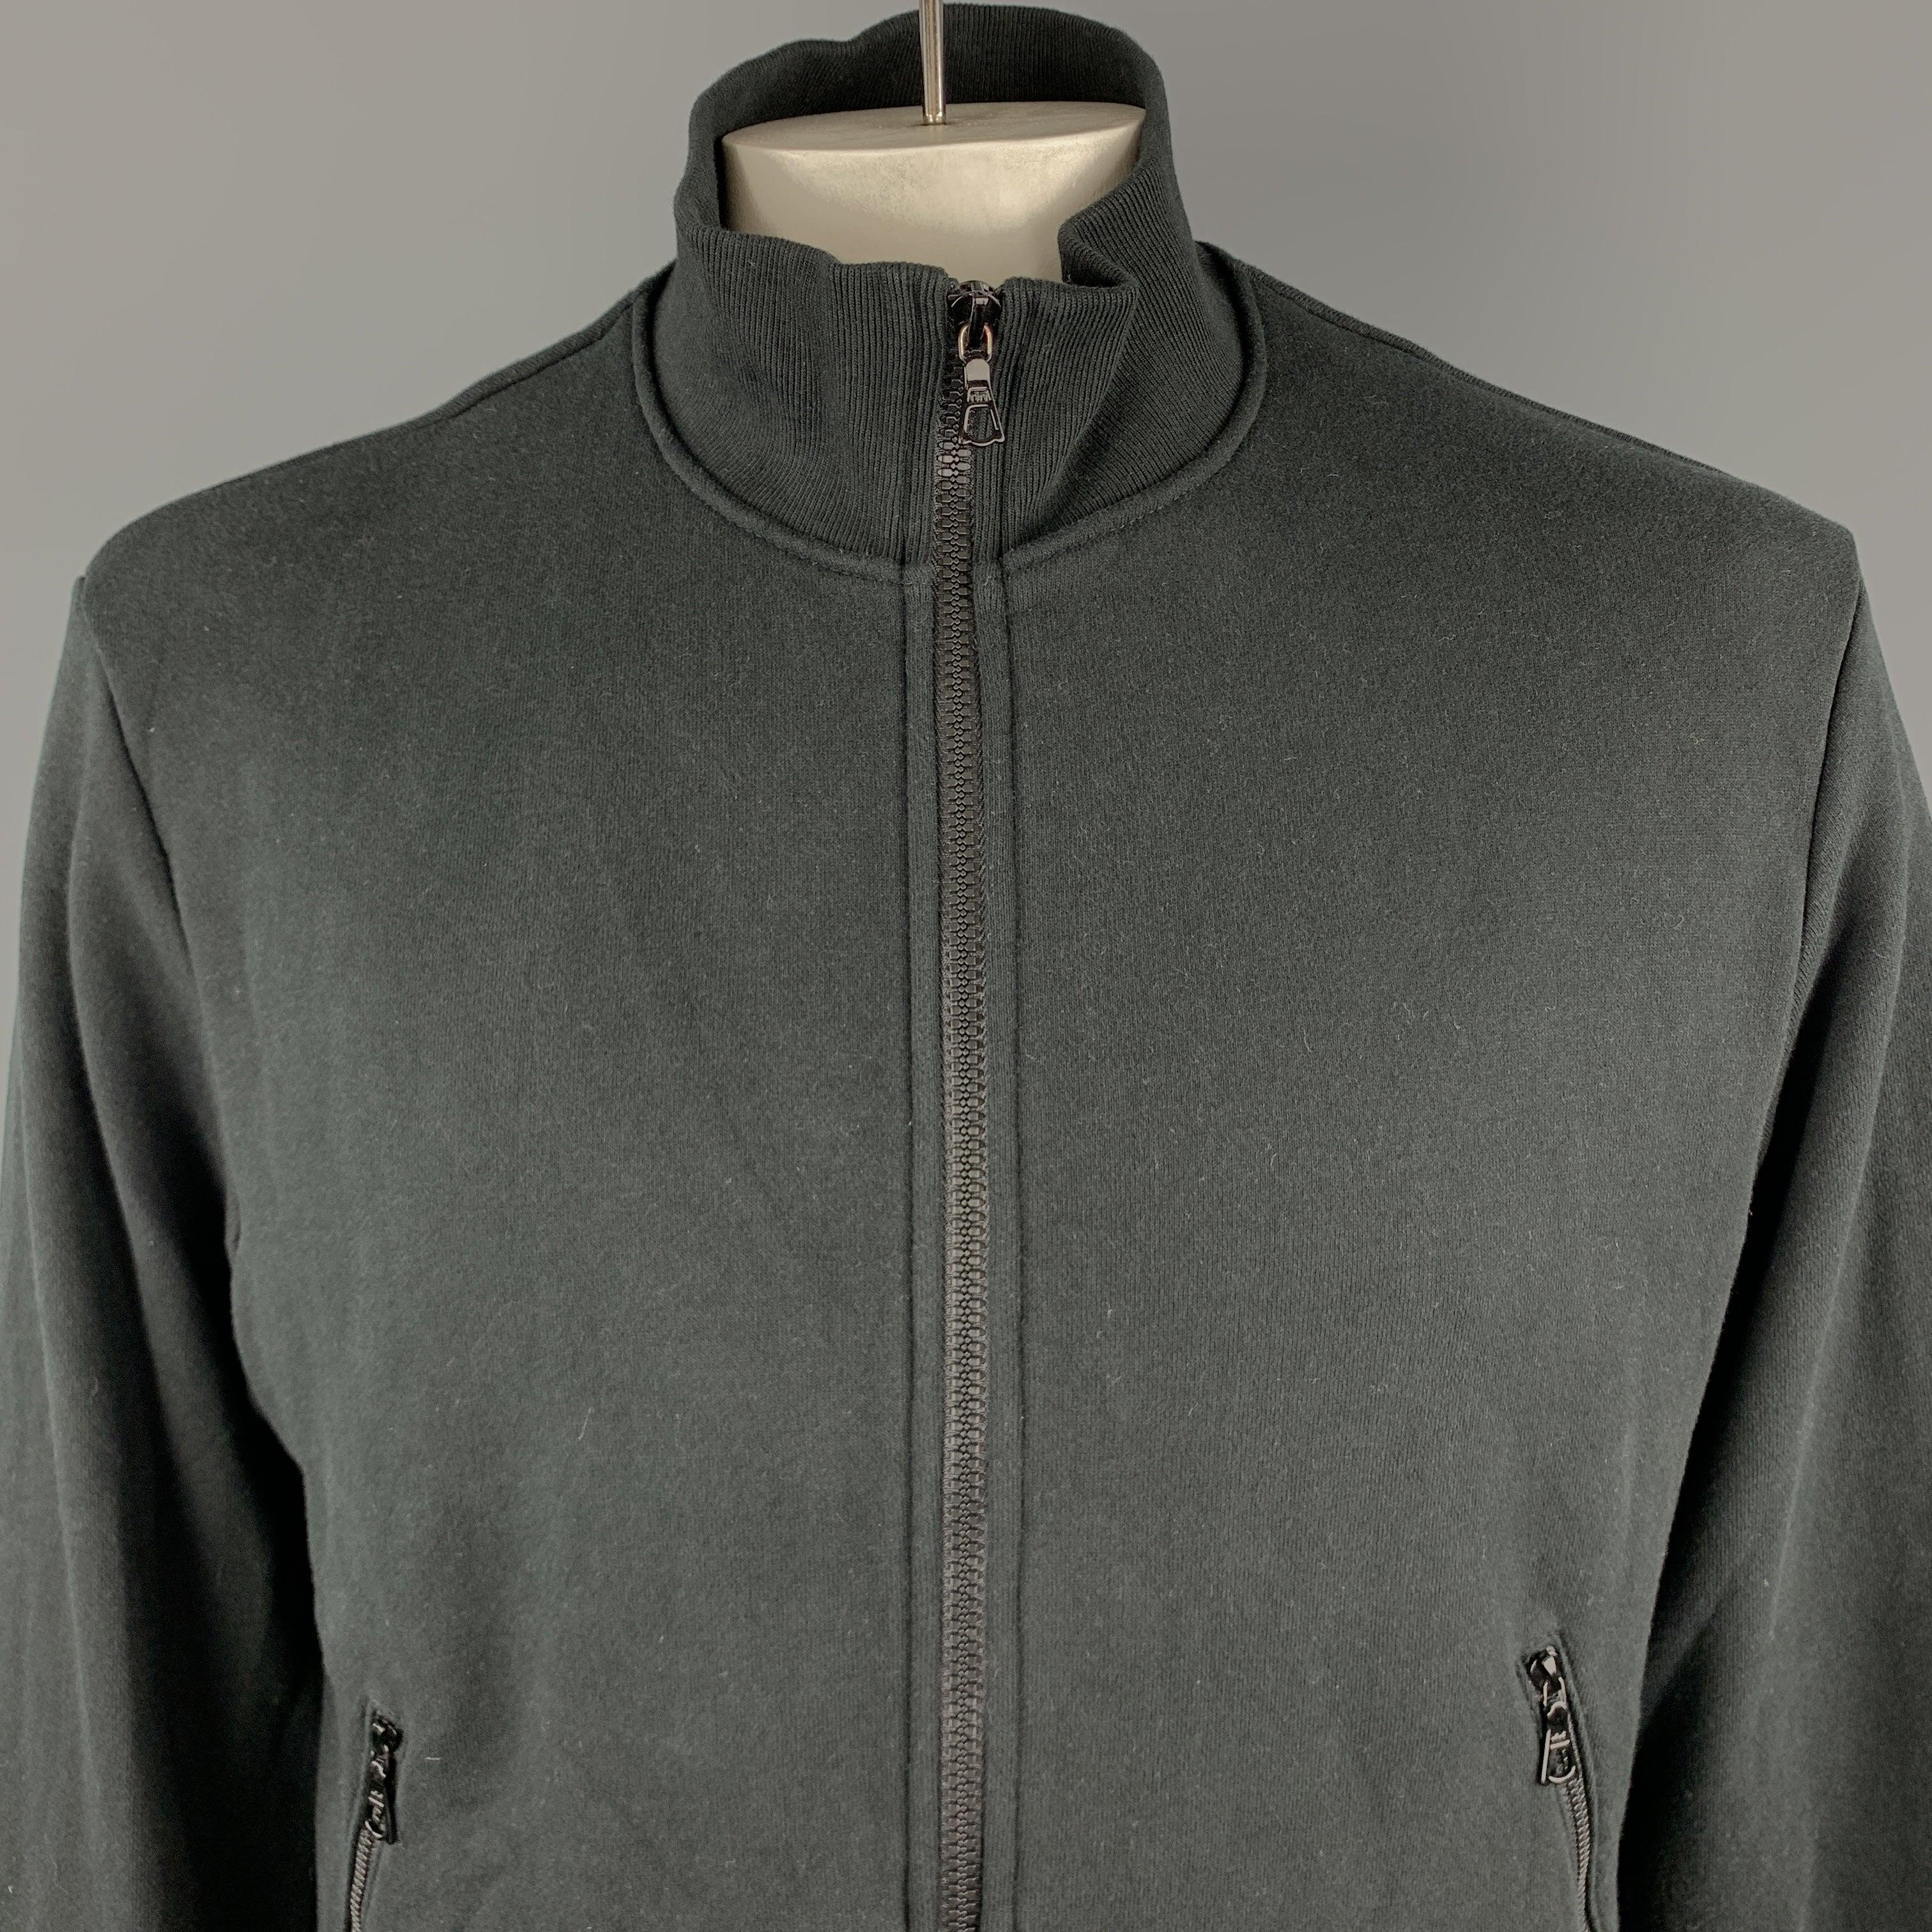 JOHN ELLIOTT Jacket comes in a black solid cotton material, with a high collar, zip pockets, trim at hem, ribbed high collar and cuffs, zip up. Made in USA.Very Good
Pre-Owned Condition. 

Marked:   3
 

Measurements: 
 
Shoulder:
19 inches